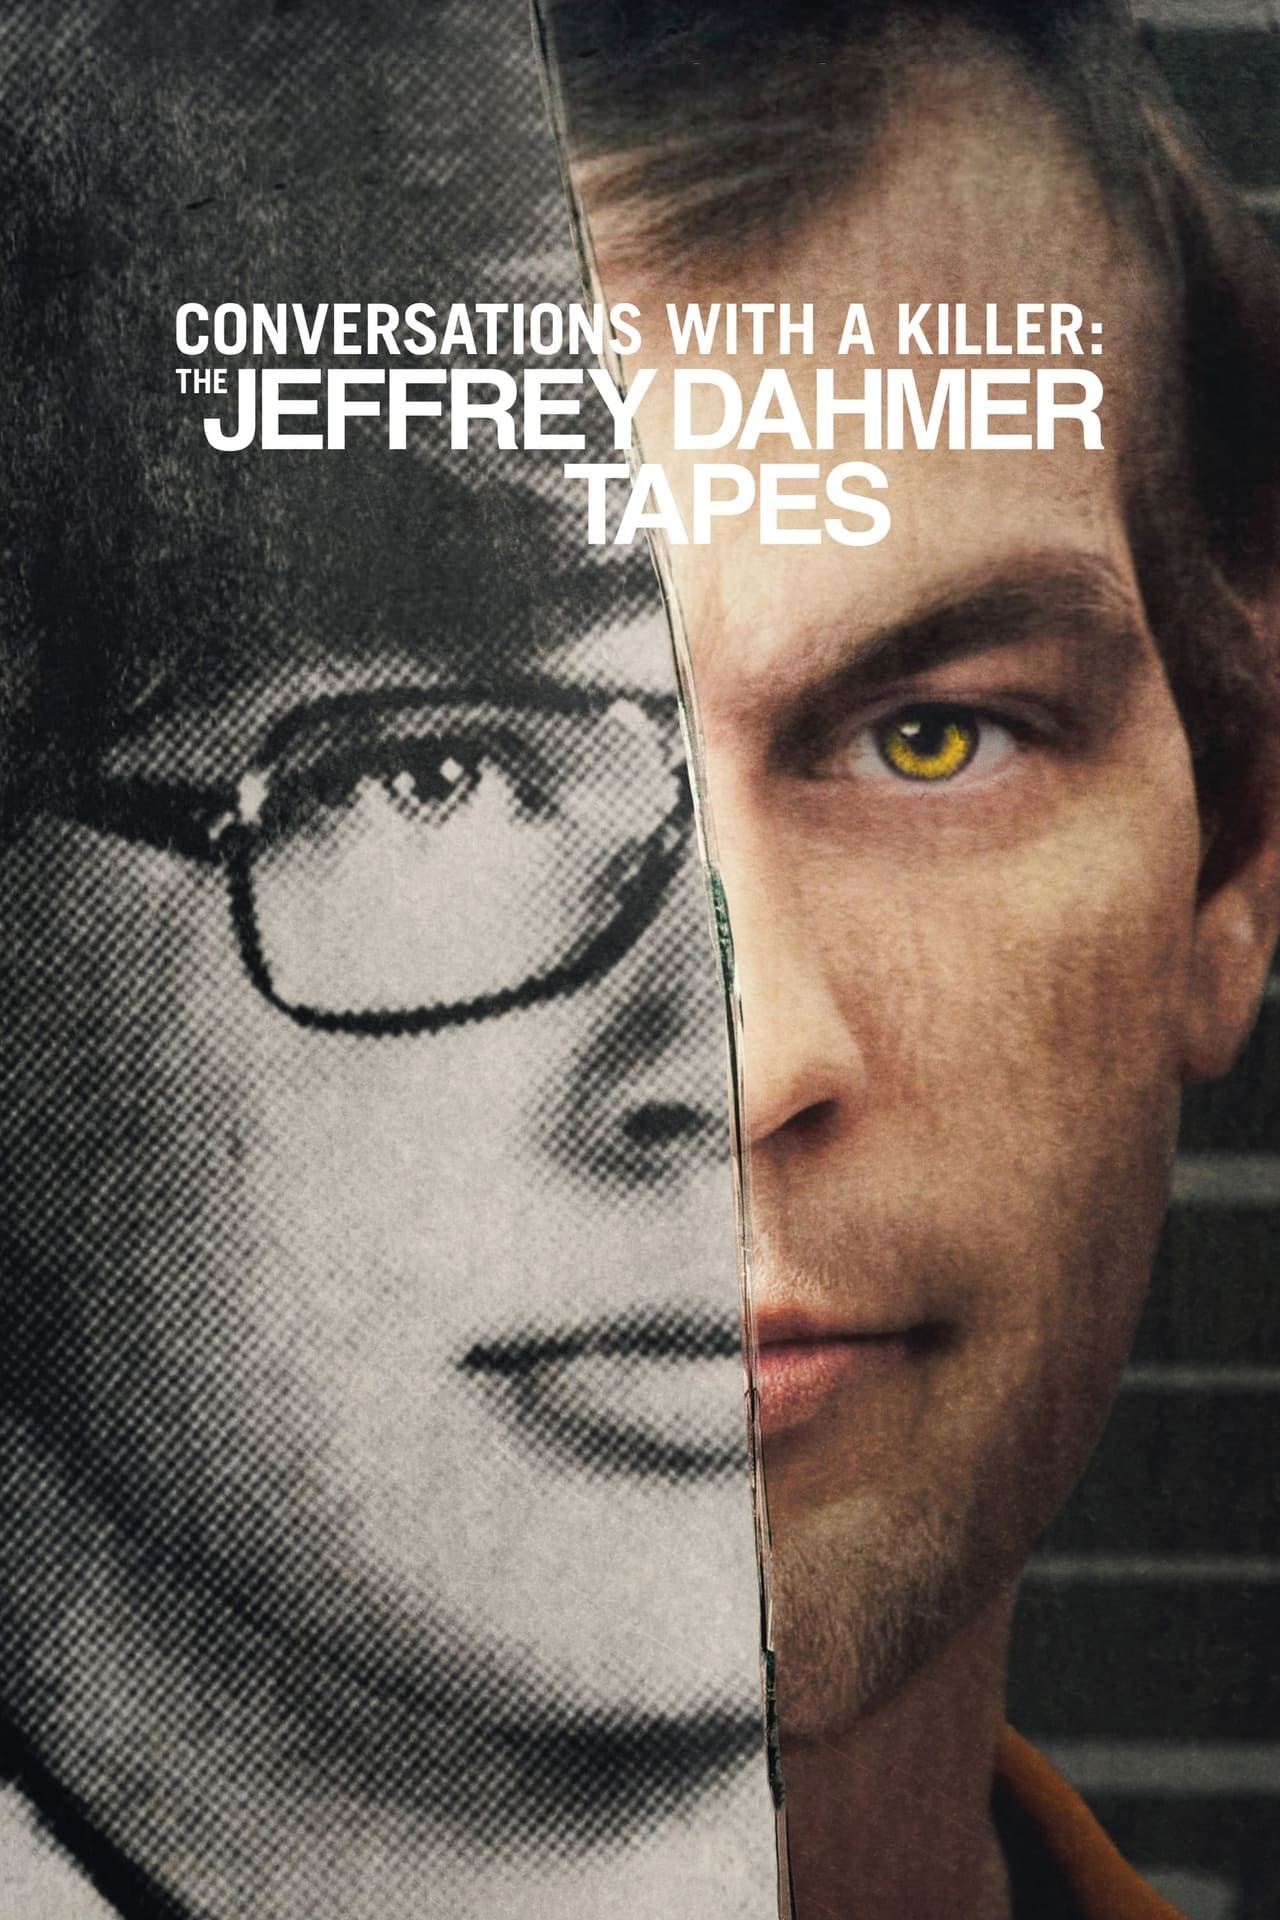 Image Conversations with a Killer: The Jeffrey Dahmer Tapes